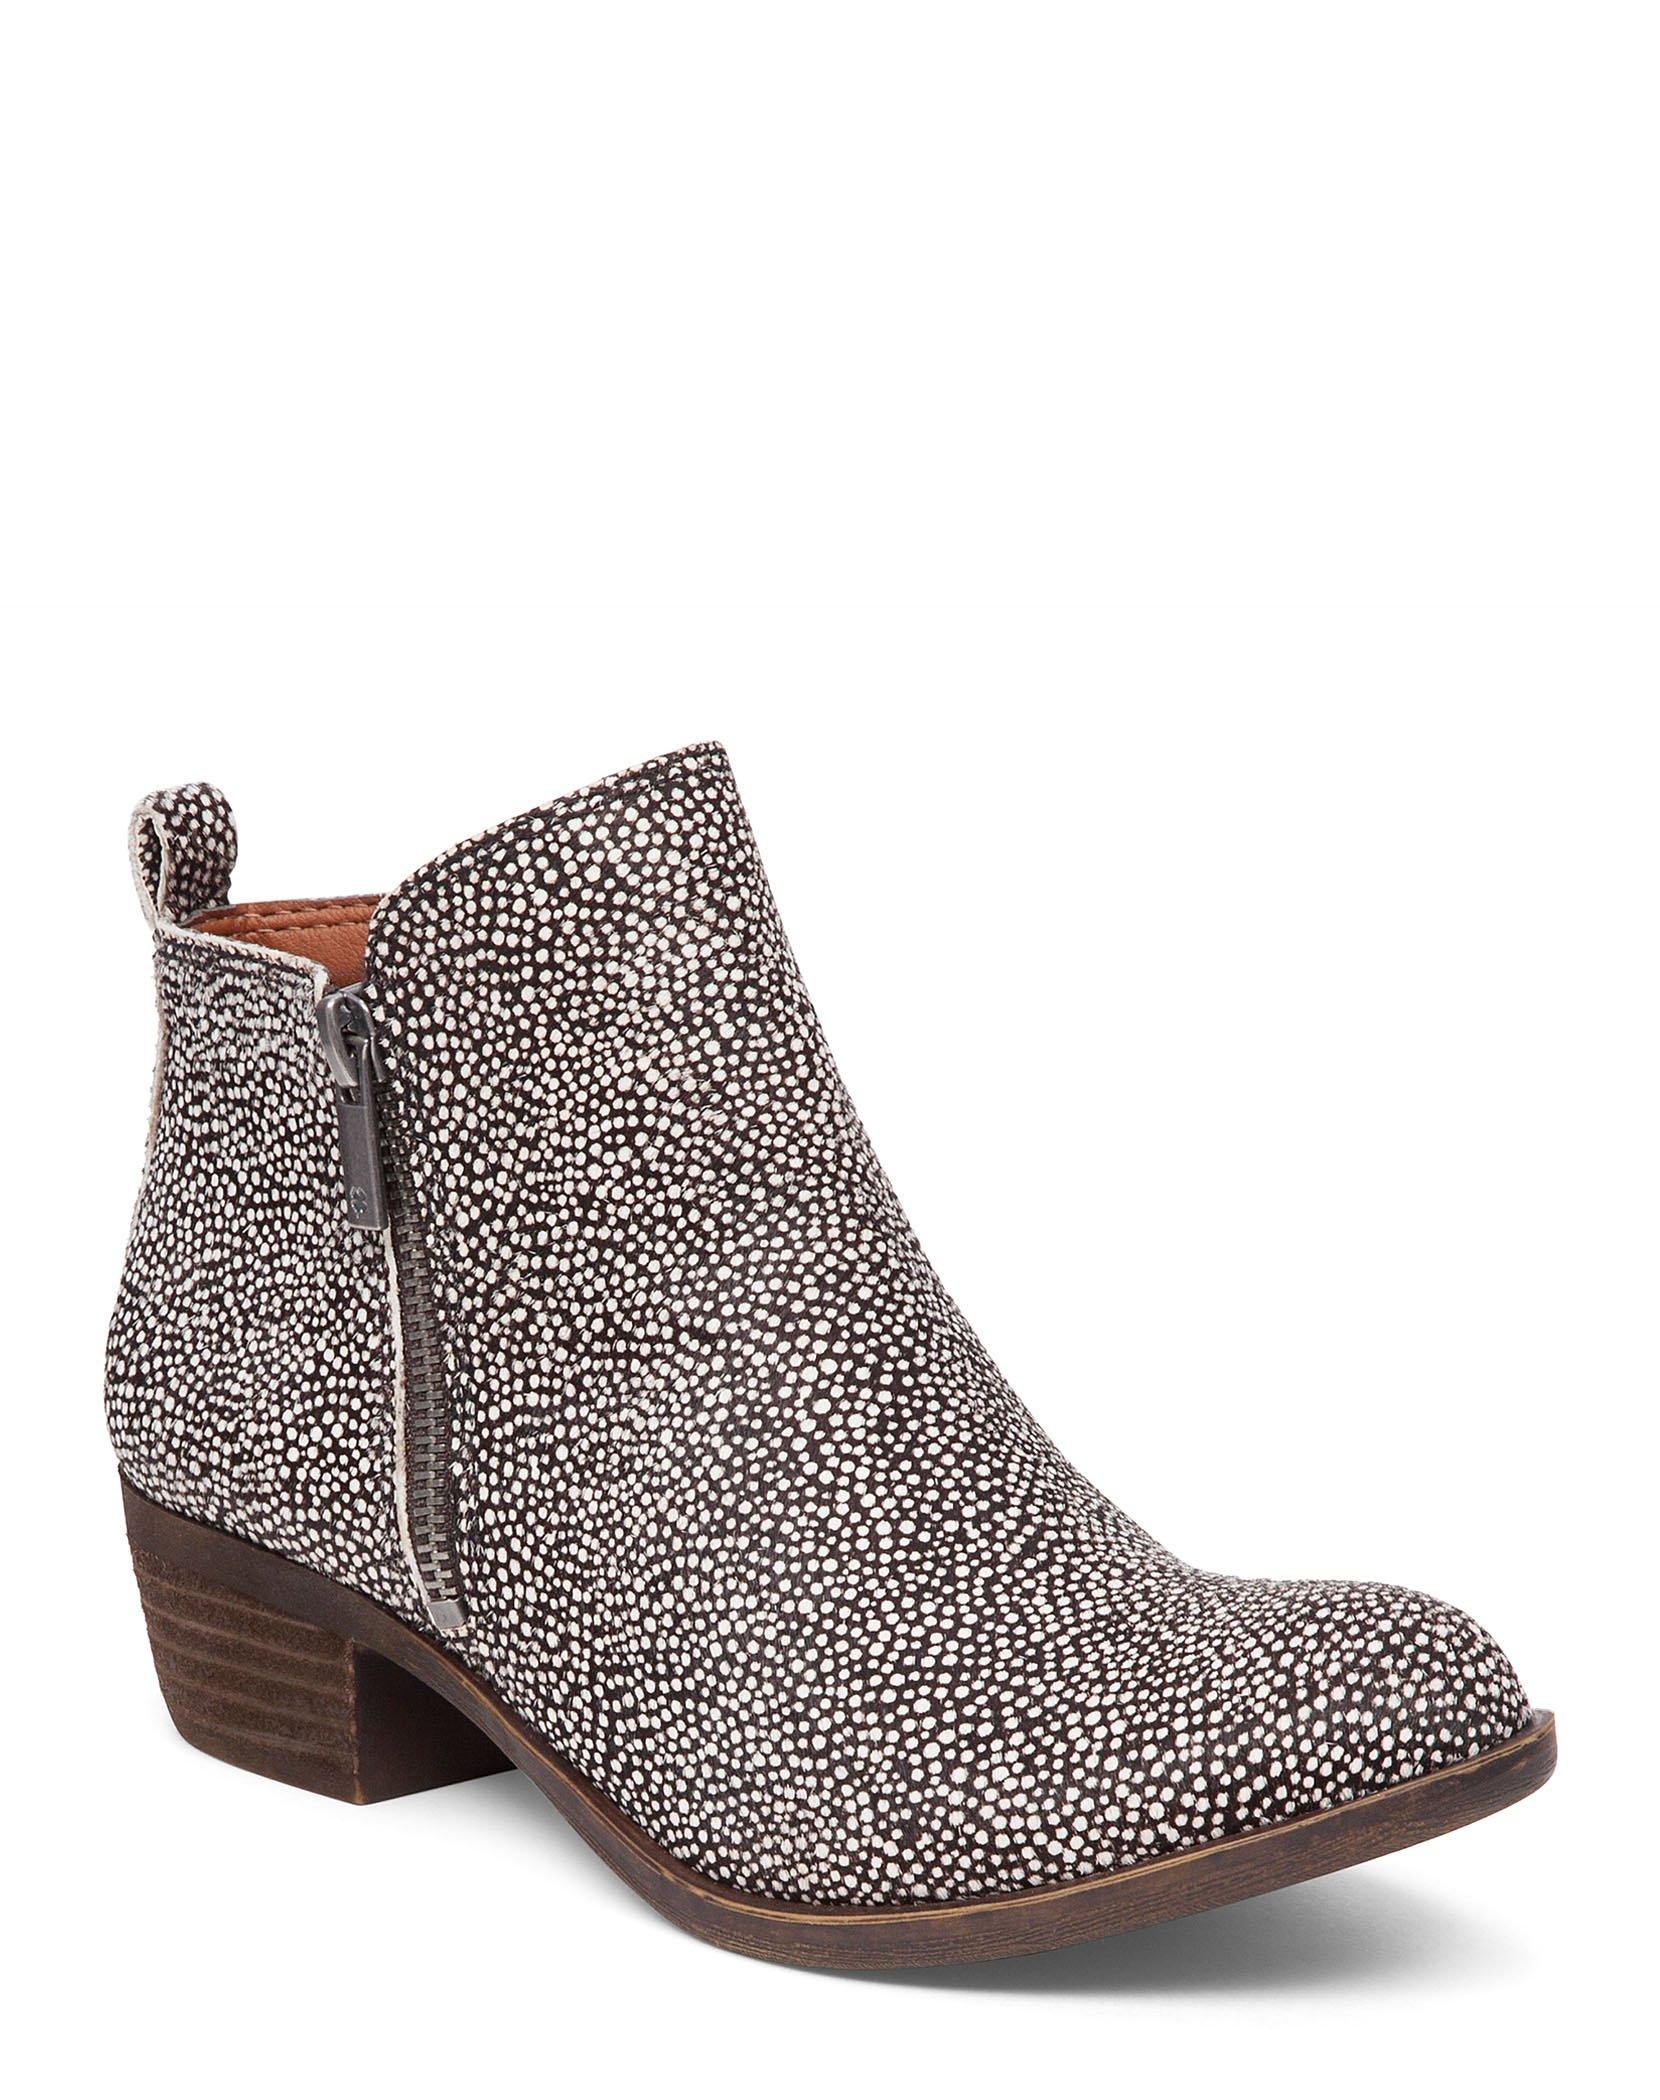 lucky brand perforated booties